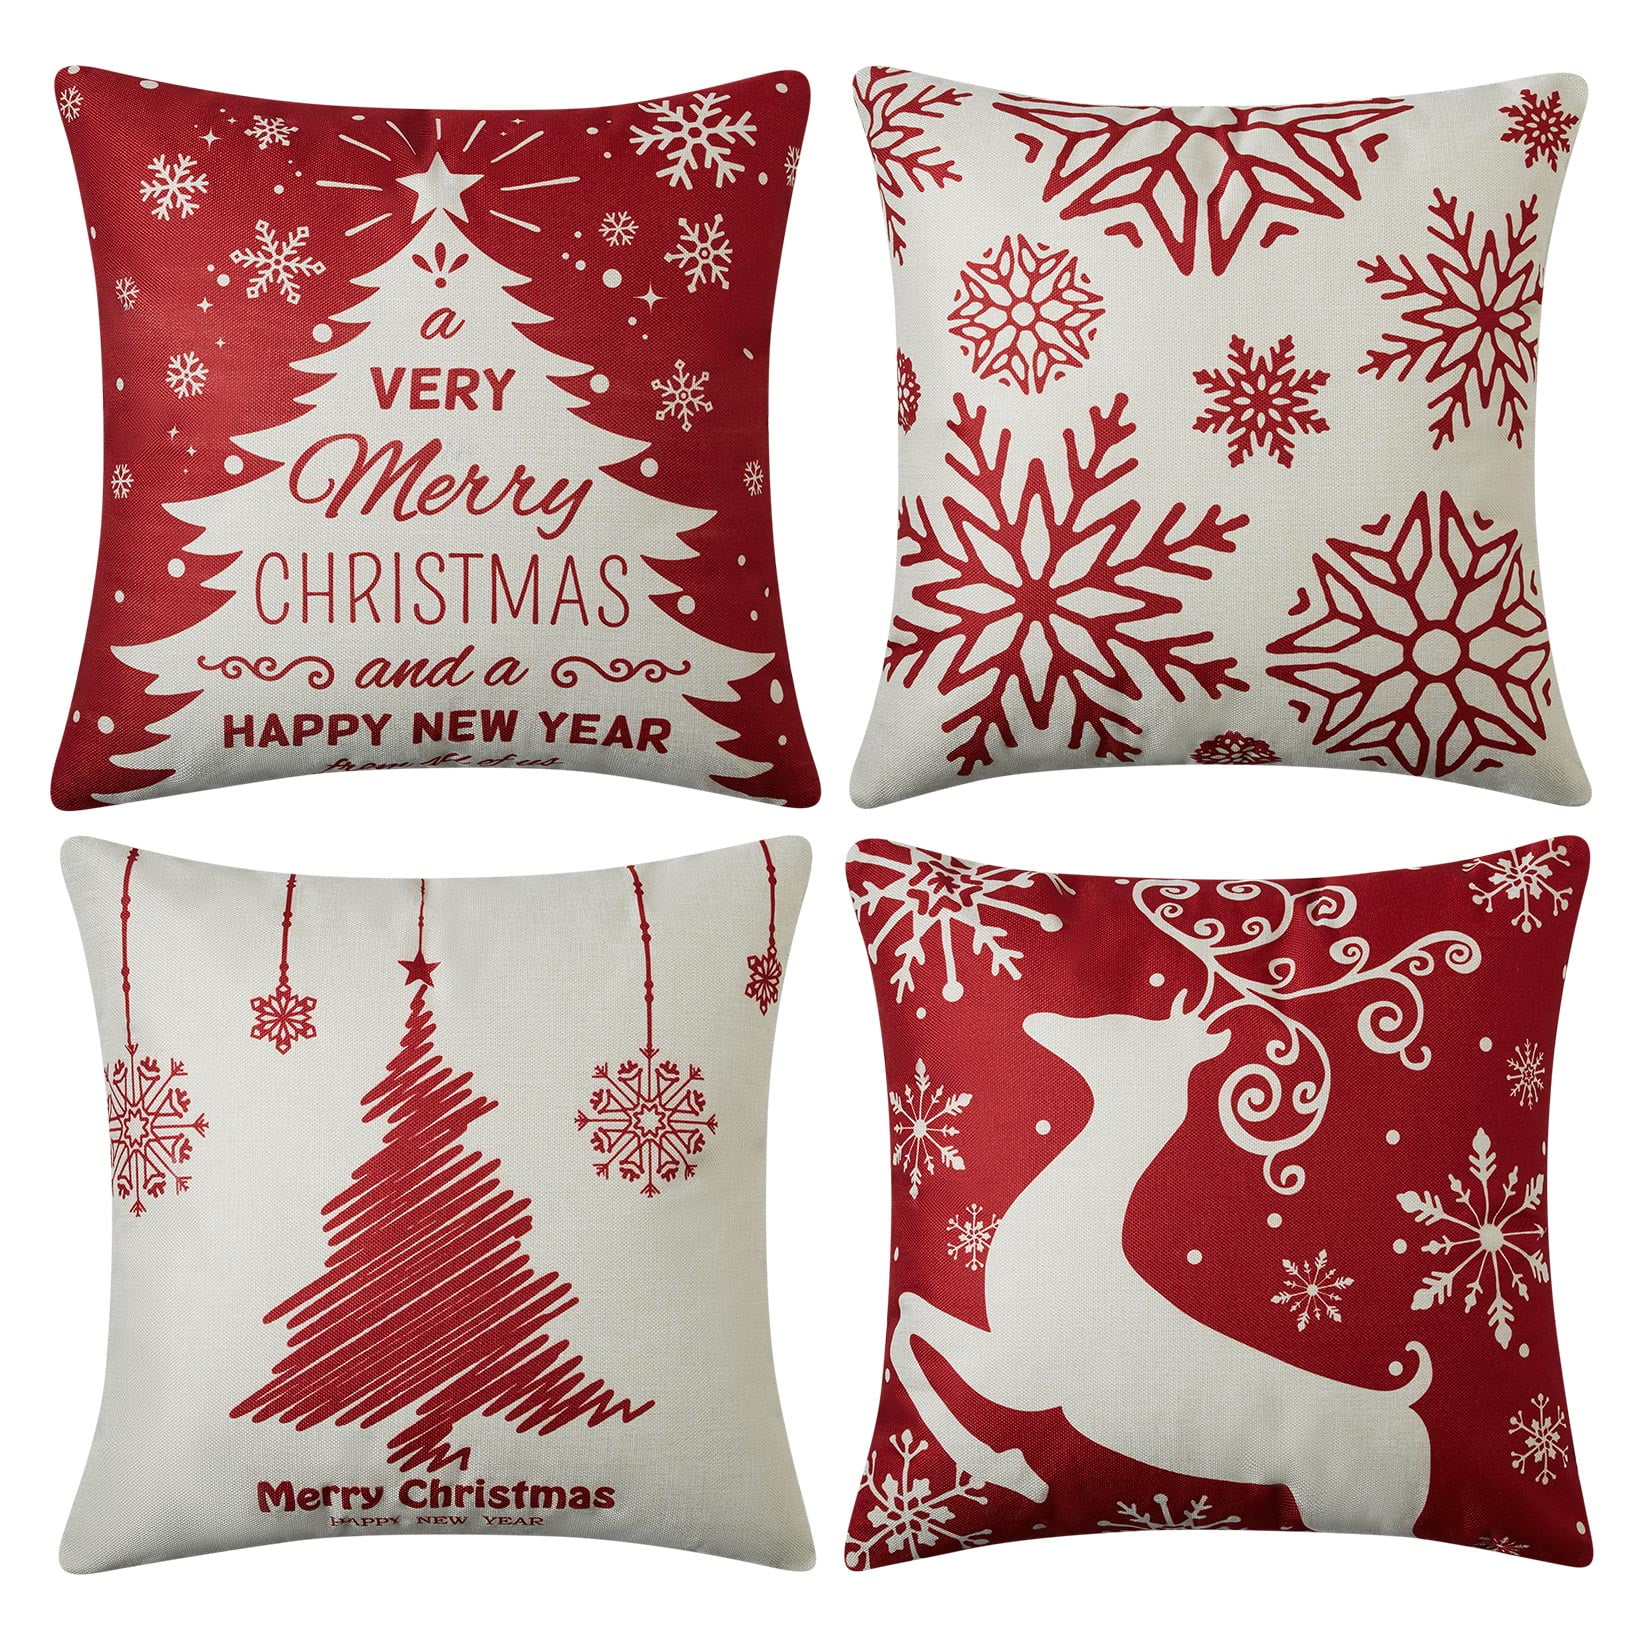 CAROMIO Red Christmas Pillow Covers 18x18 Christmas Decorations for Home  Indoor Decorative Throw Pillows for Bed Room Farmhouse Xmas Deer Merry